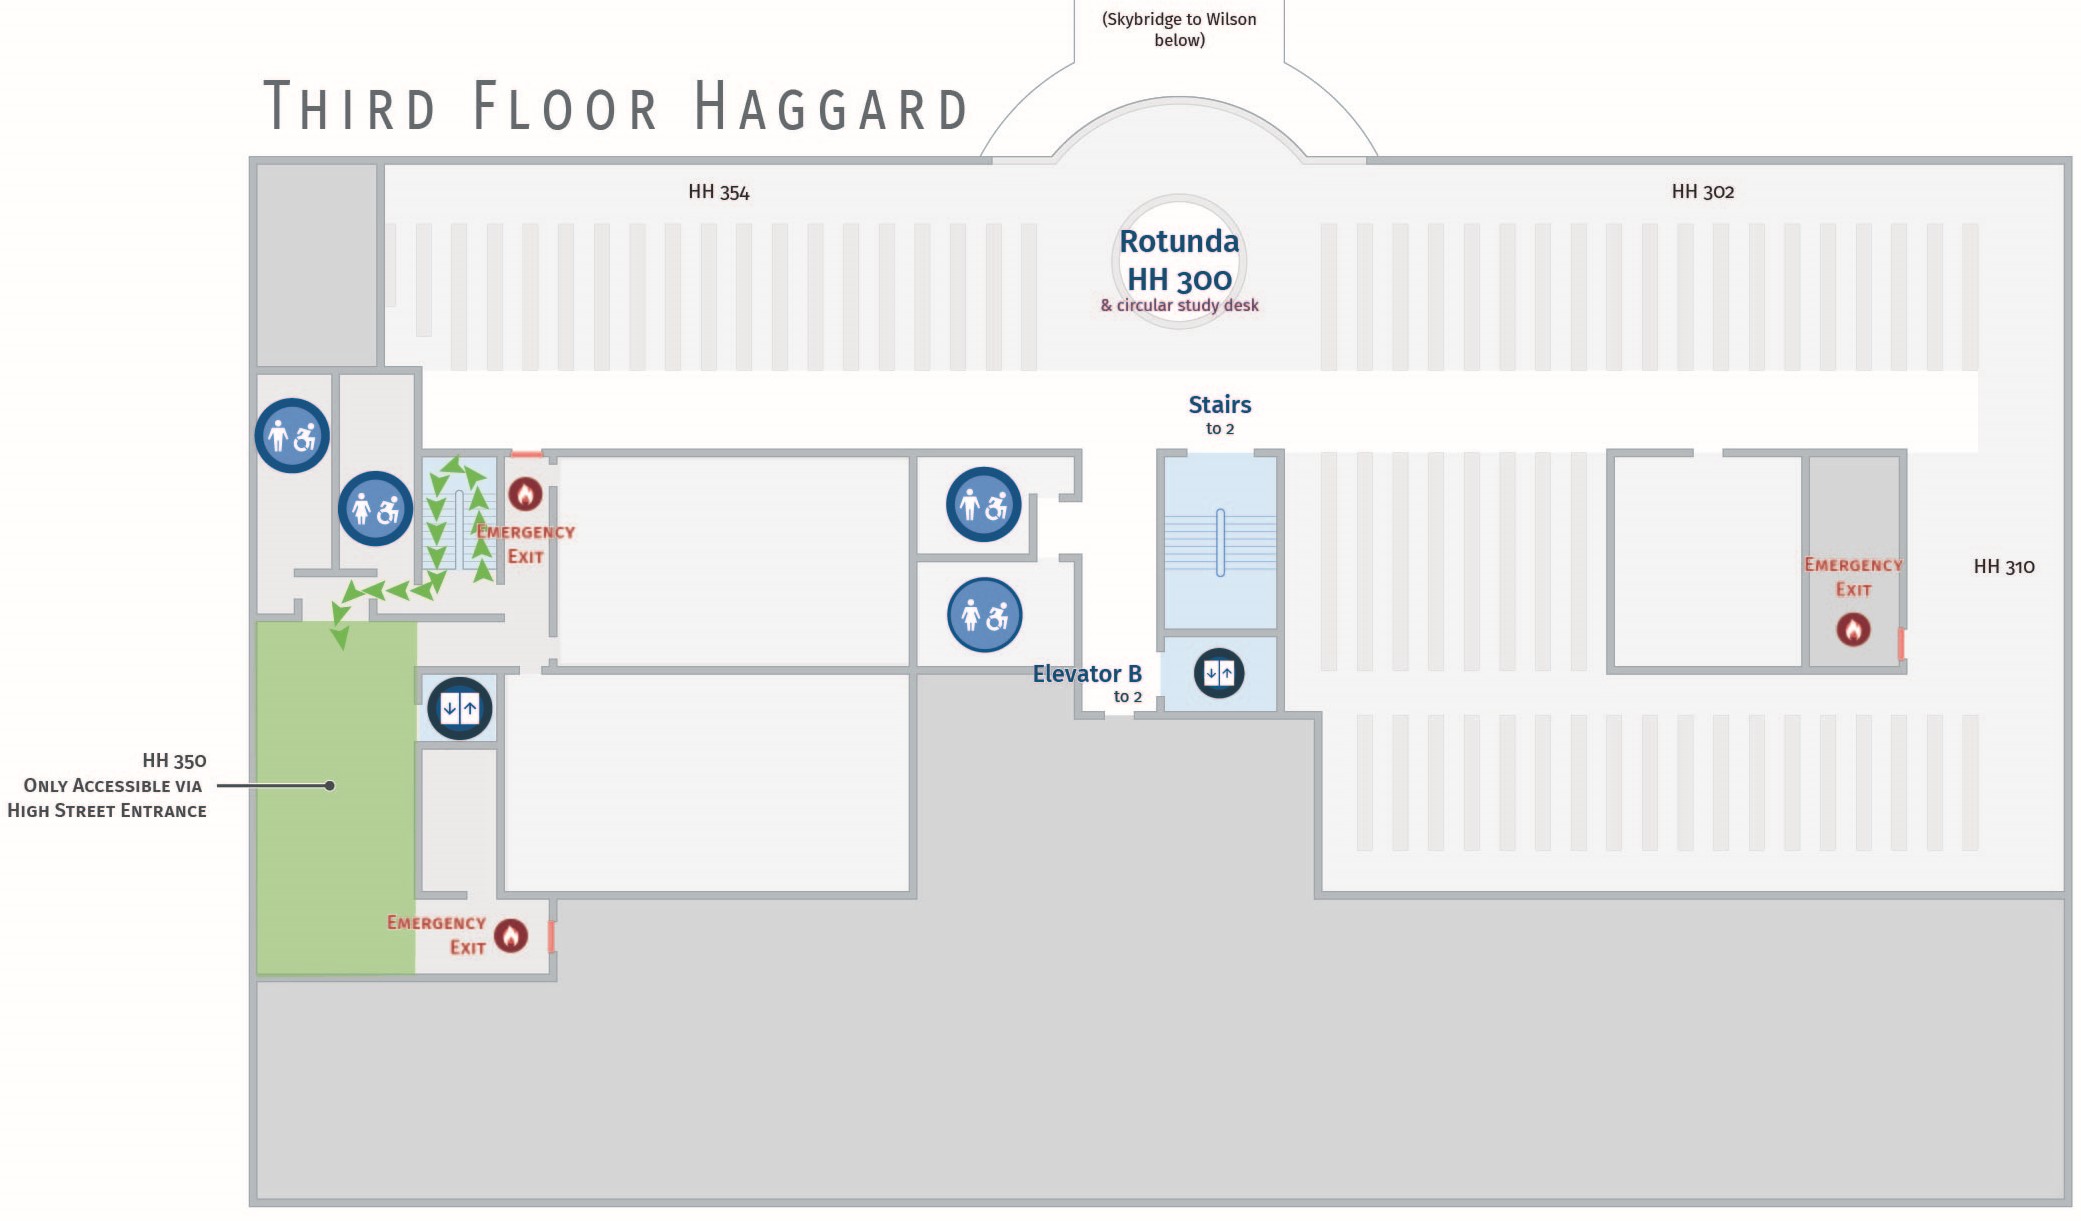 Floor plan, third floor of Haggard with path to HH 350.